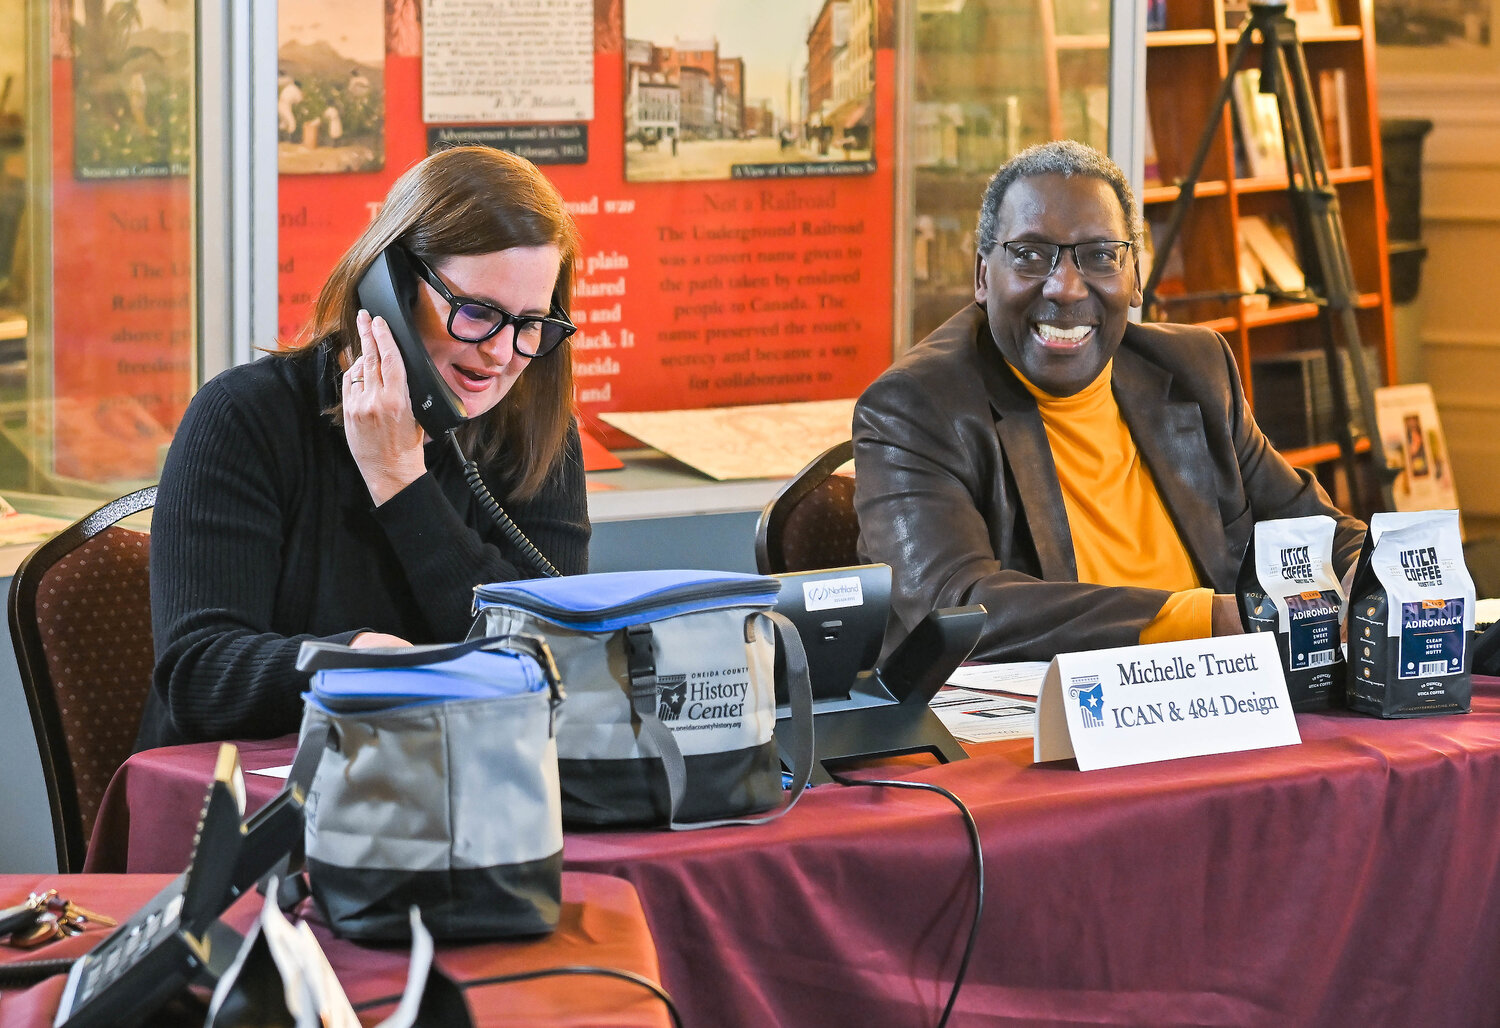 Volunteers staff a phone bank during last week’s 18th annual Oneida County History Center telethon. The event raised more than $40,000 to benefit the center. From left: Greg Evans, of Indium Corp.; Rev. Sharon Baugh, of the NAACP; Michelle Truett, of ICAN; and David Mathis, of the Oneida County DSS.